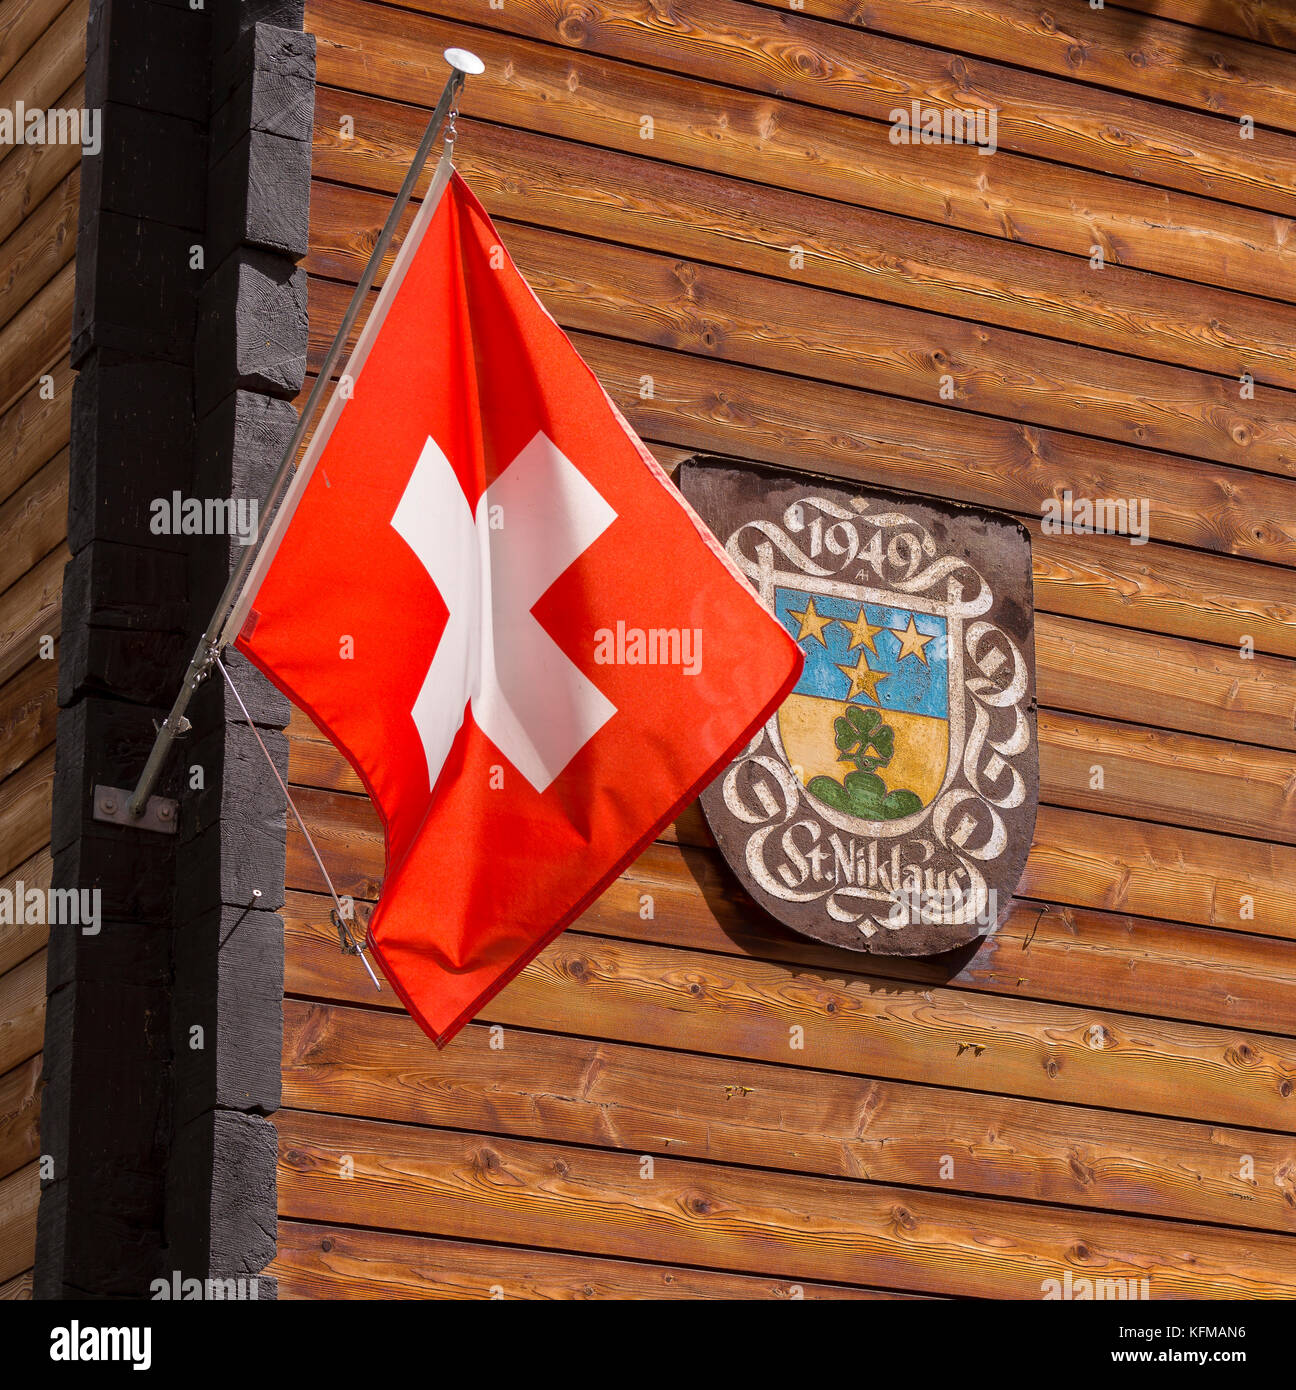 ST. NIKLAUS, SWITZERLAND - Swiss flag and St. Niklaus sign on wooden wall. Stock Photo